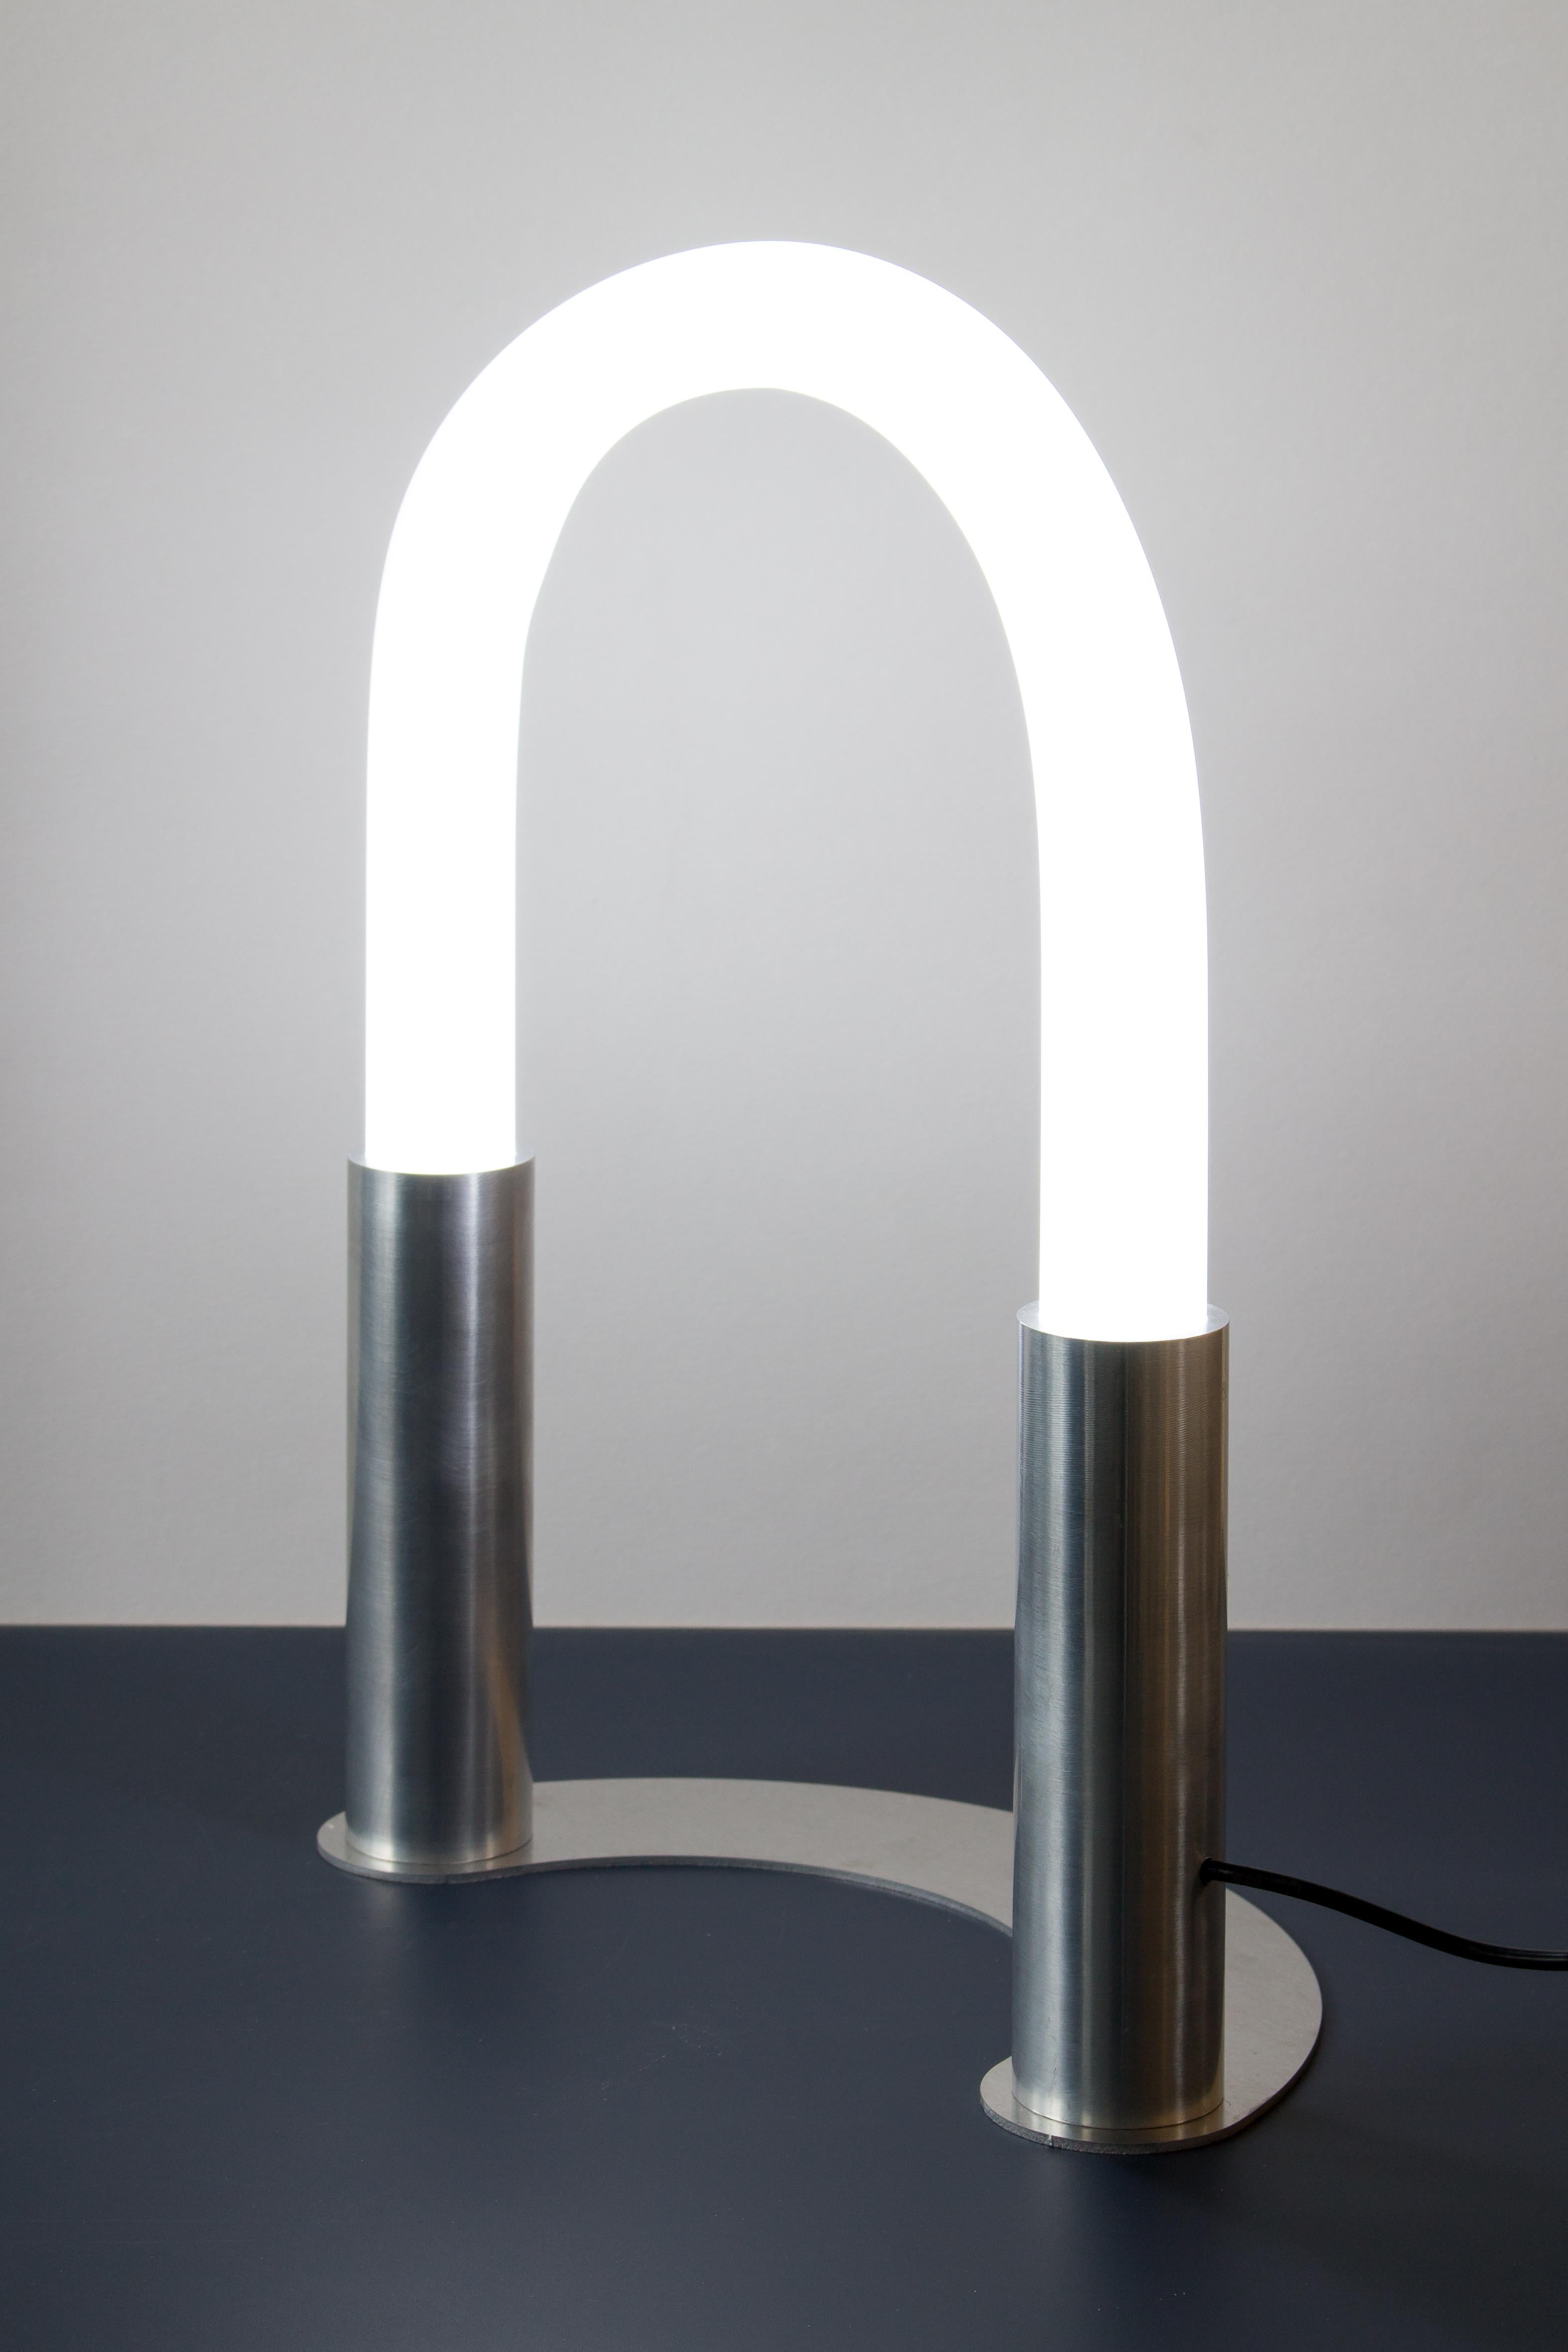 Small Arceo table lamp by Joachim-Morineau Studio
Dimensions: H 30 x D 15 x W 35 cm, 2 kg
Materials: Aluminium beams, tubes and sheets, frosted plexiglass, warm light LED with dimmer.
Possibility to have a different colour/finish (such as blasted